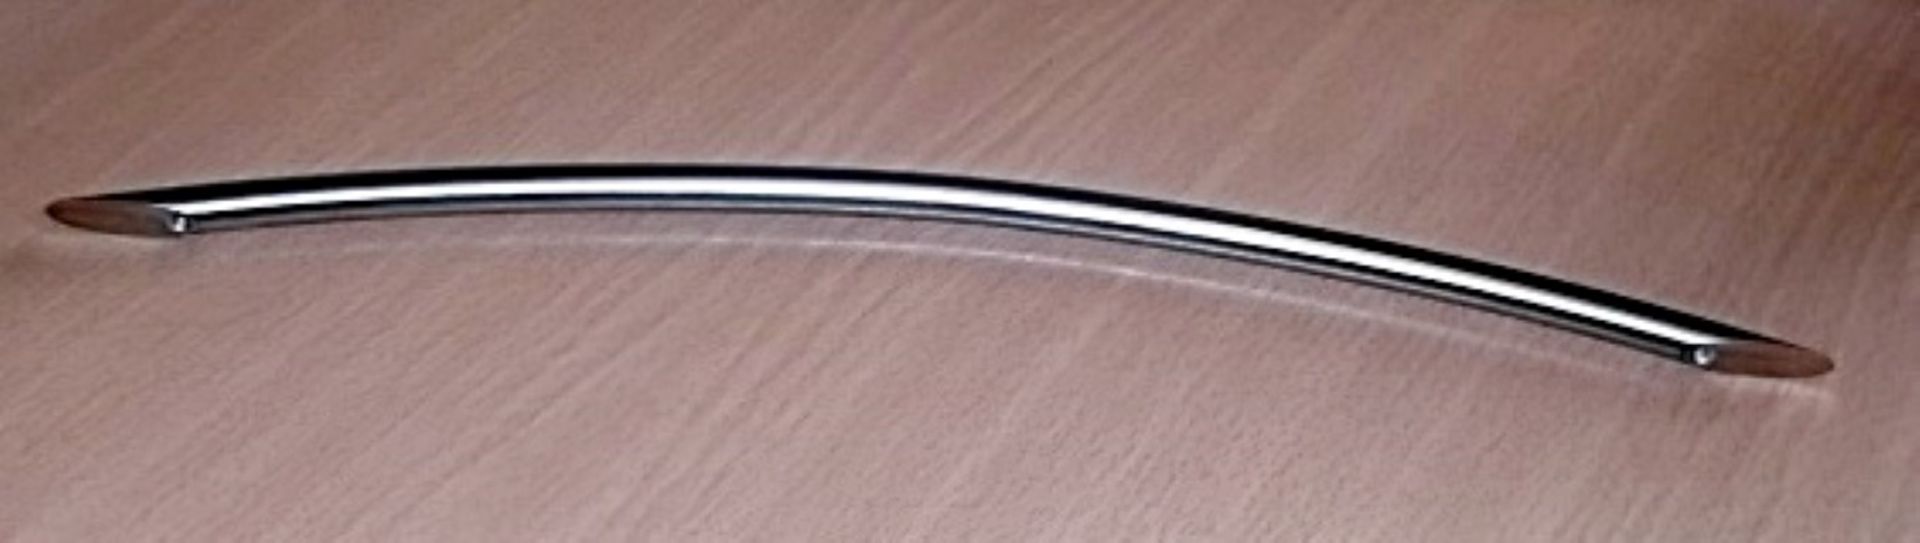 50 x BOW Handle Kitchen Door Handles - 320mm - New Stock - Brushed Nickel Finish - Fixings Included - Image 15 of 20